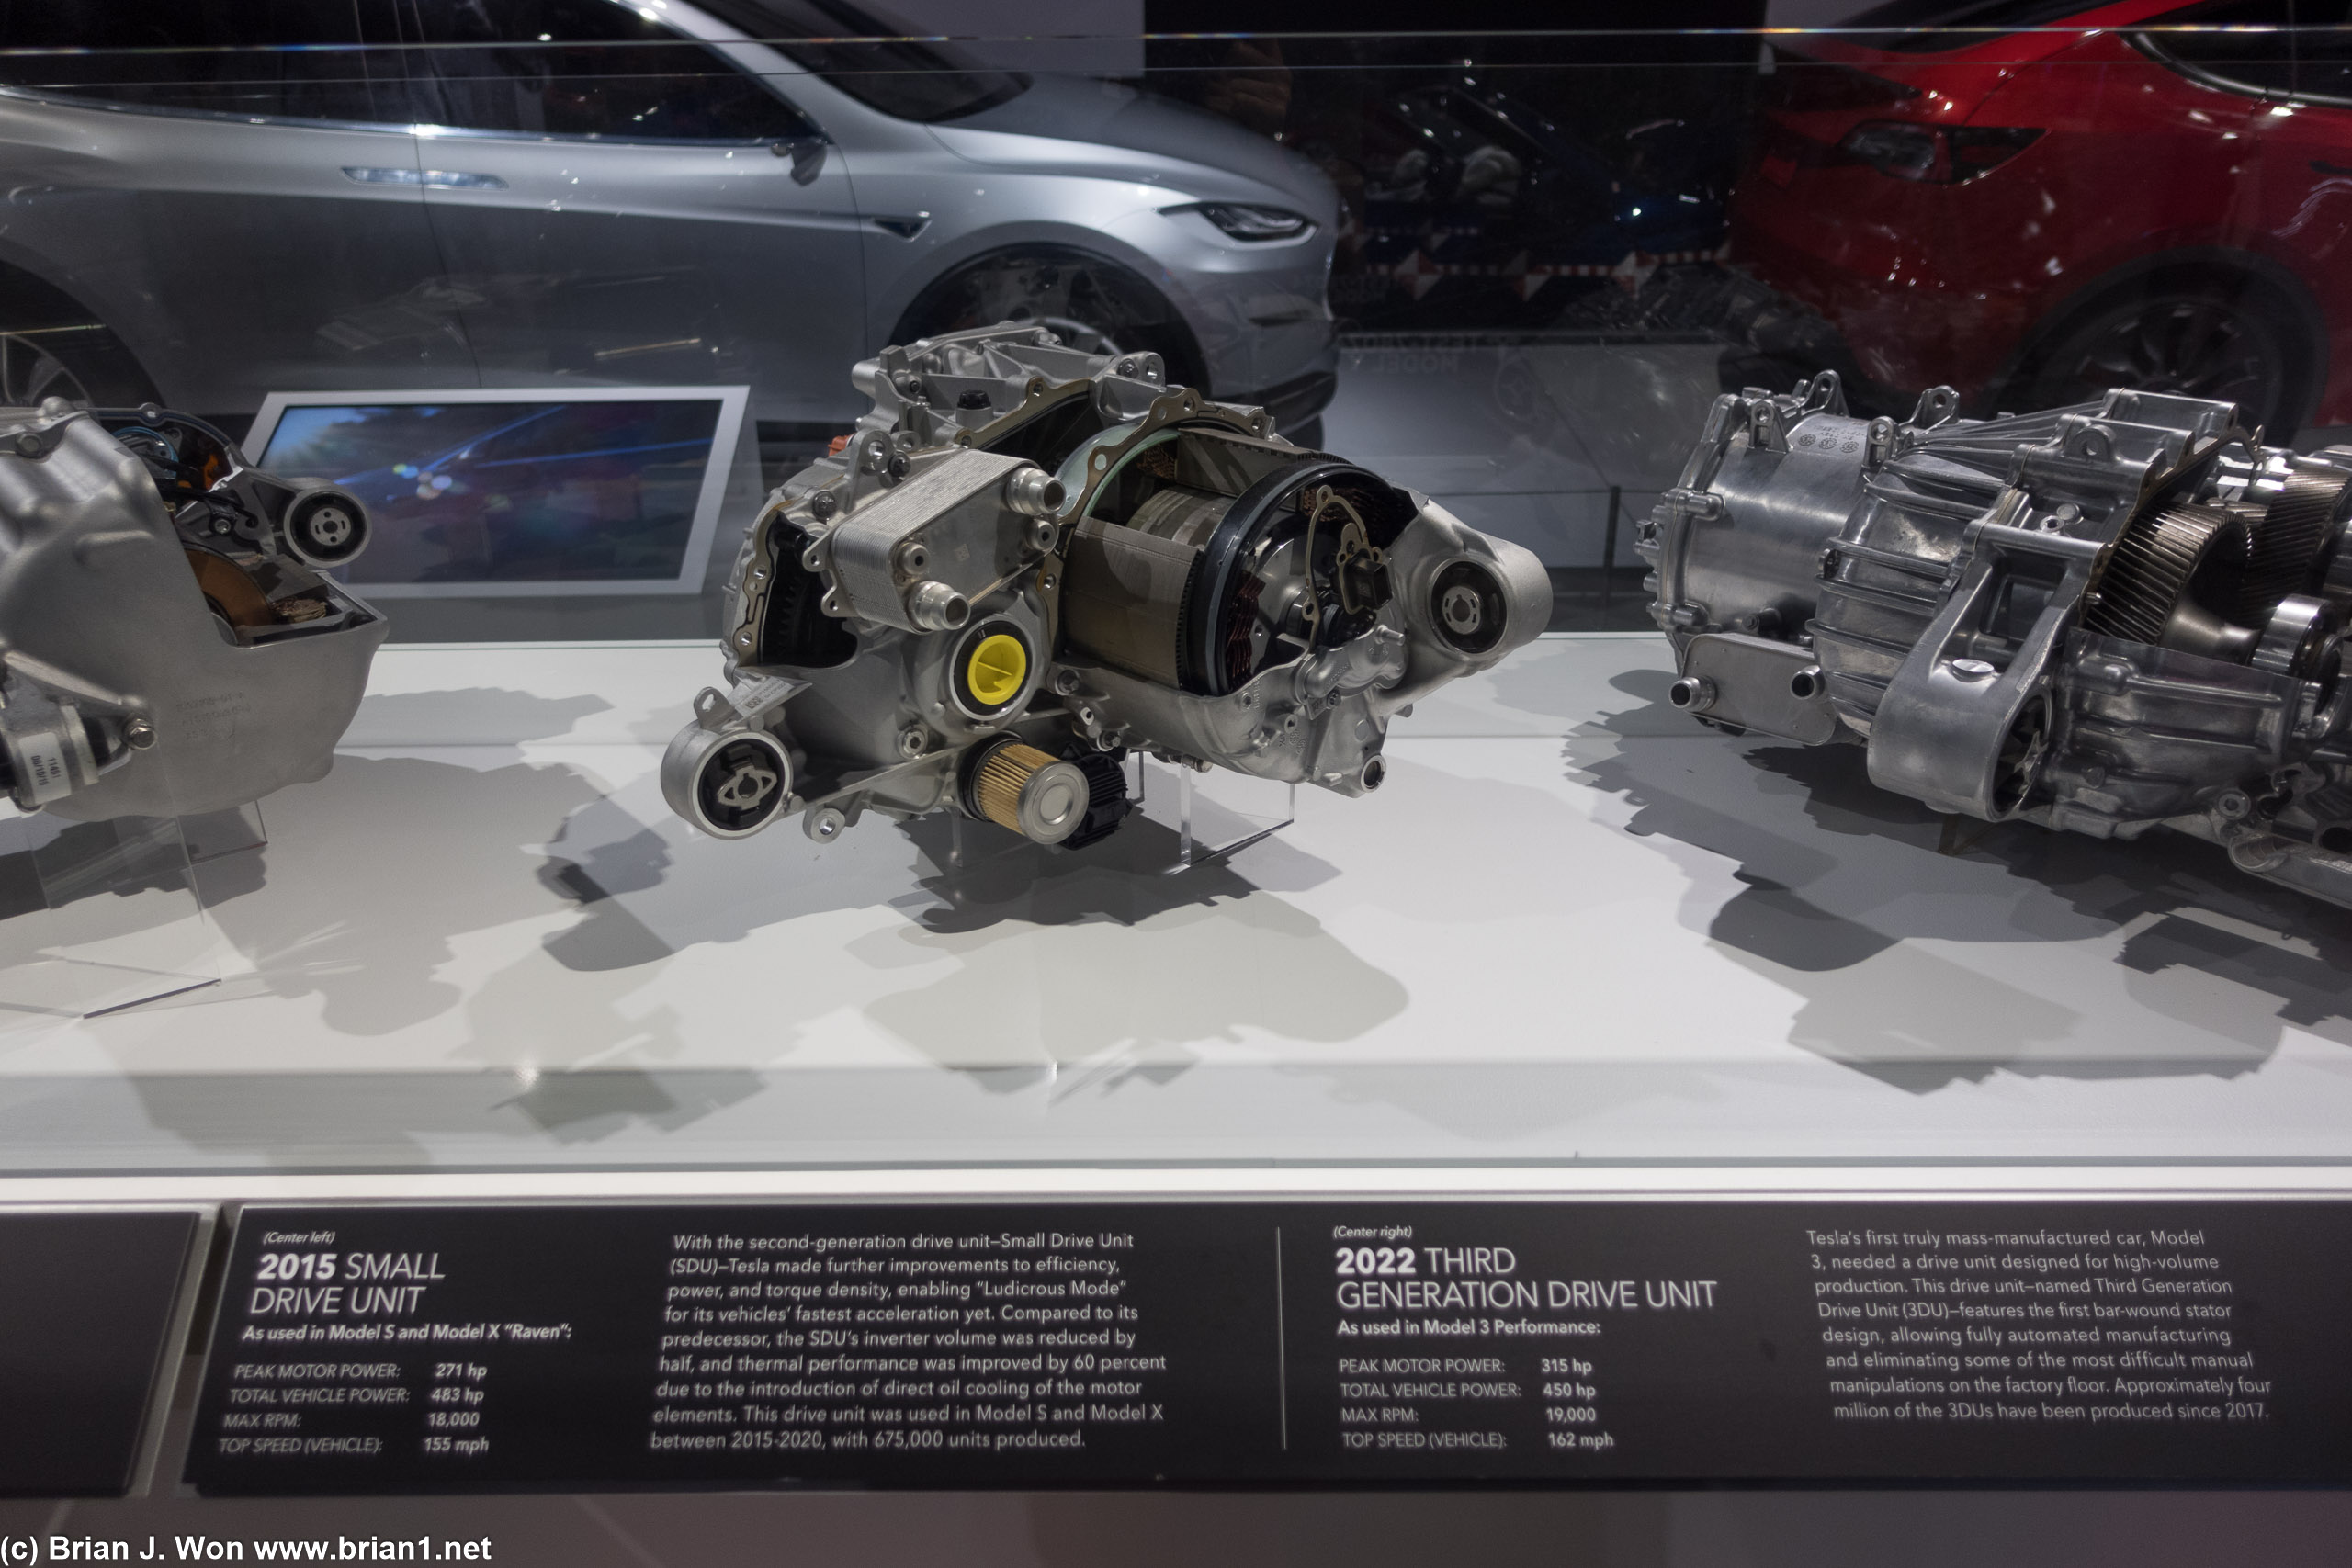 2022 3rd gen drive unit in Model 3 Performance at center.